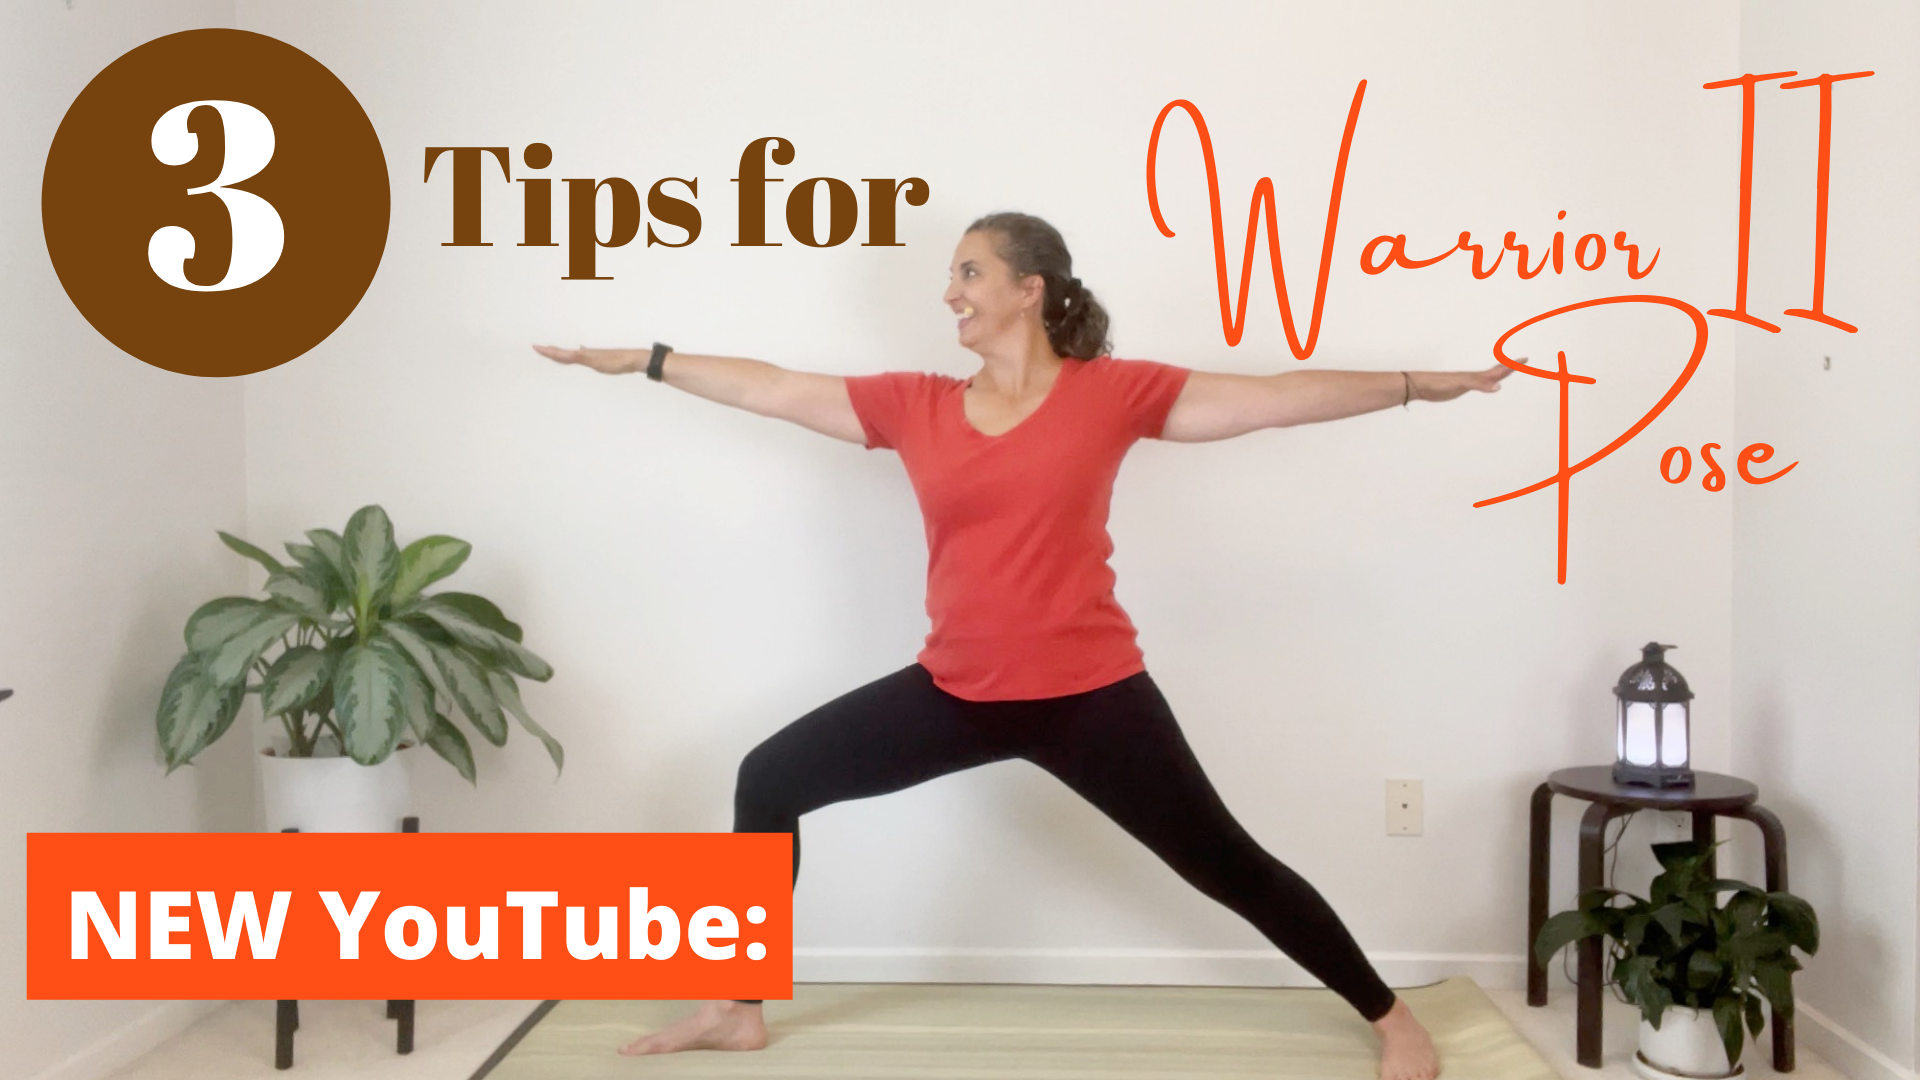 YouTube: 3 Tips to Align Warrior 2 | Yoga with Laura